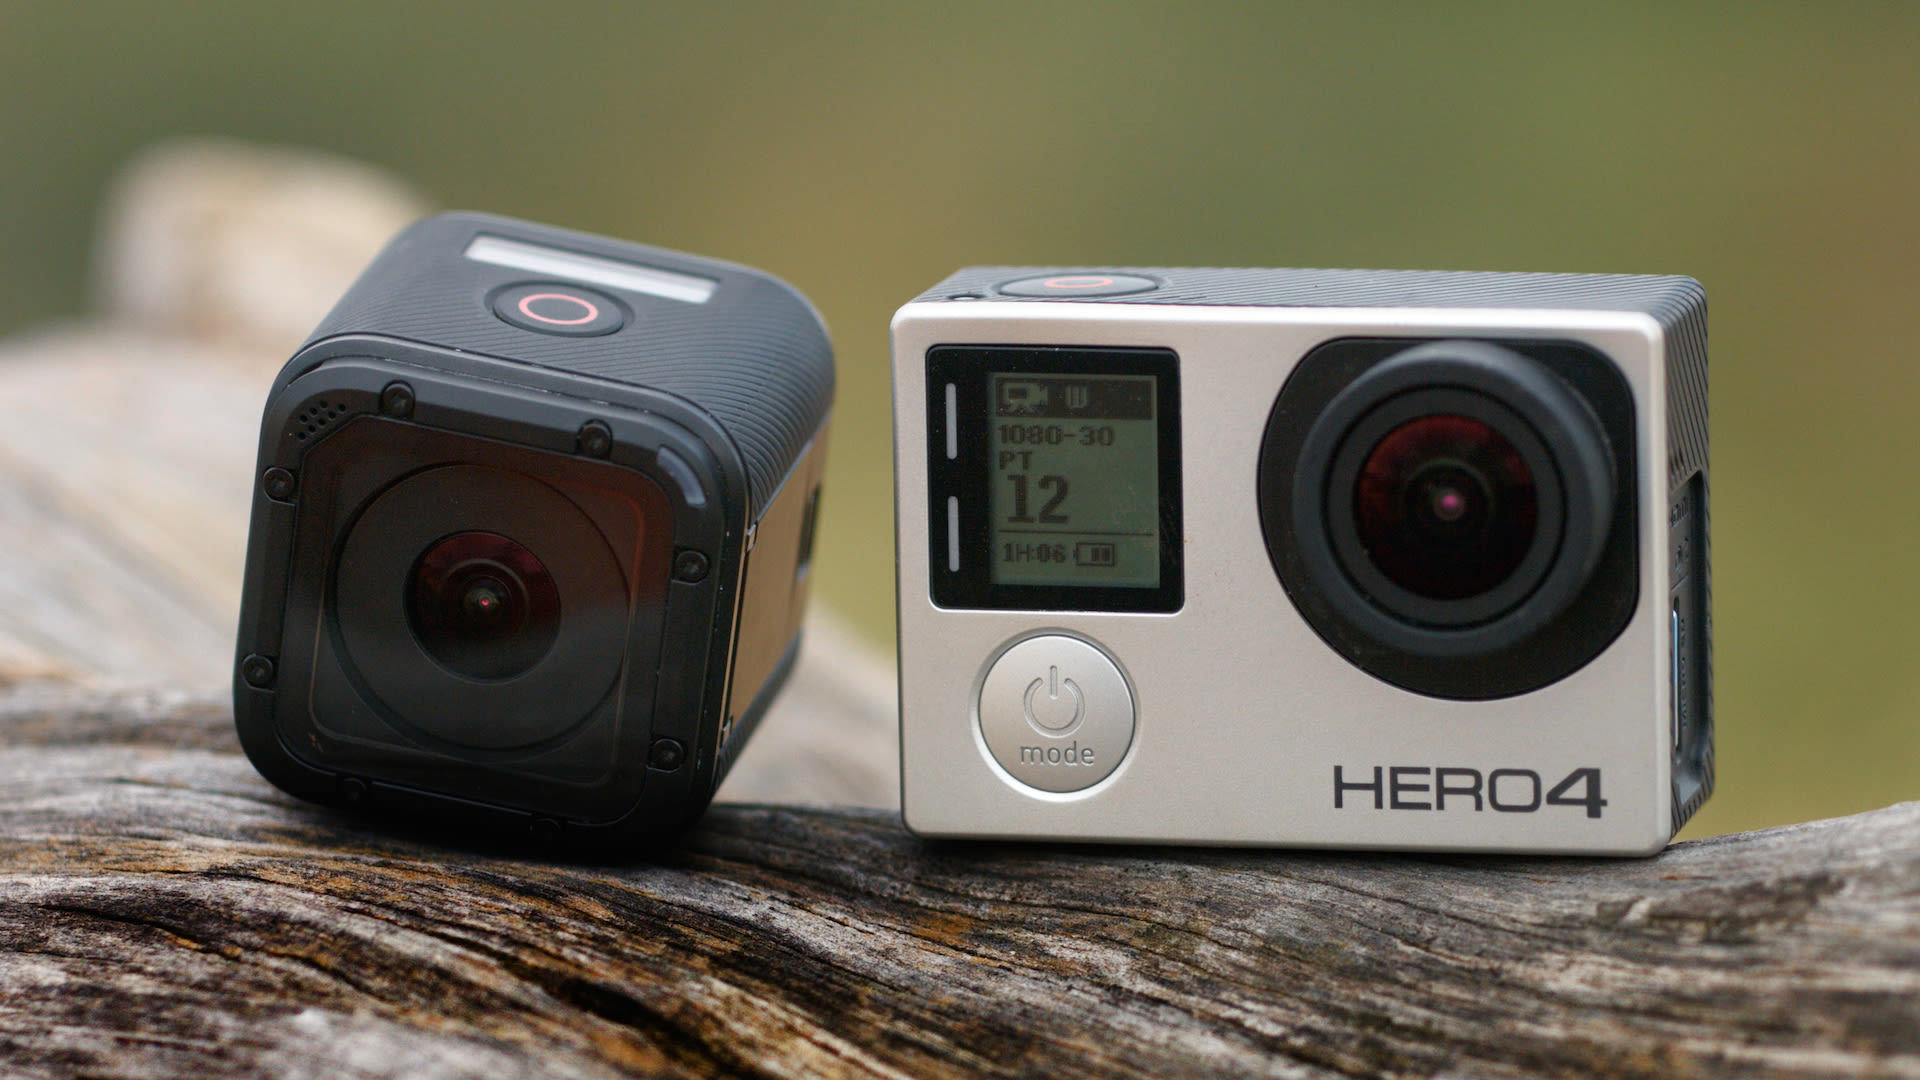 Mini GoPro! Hero4 Session: Full Review, Tests, Comparison Footage